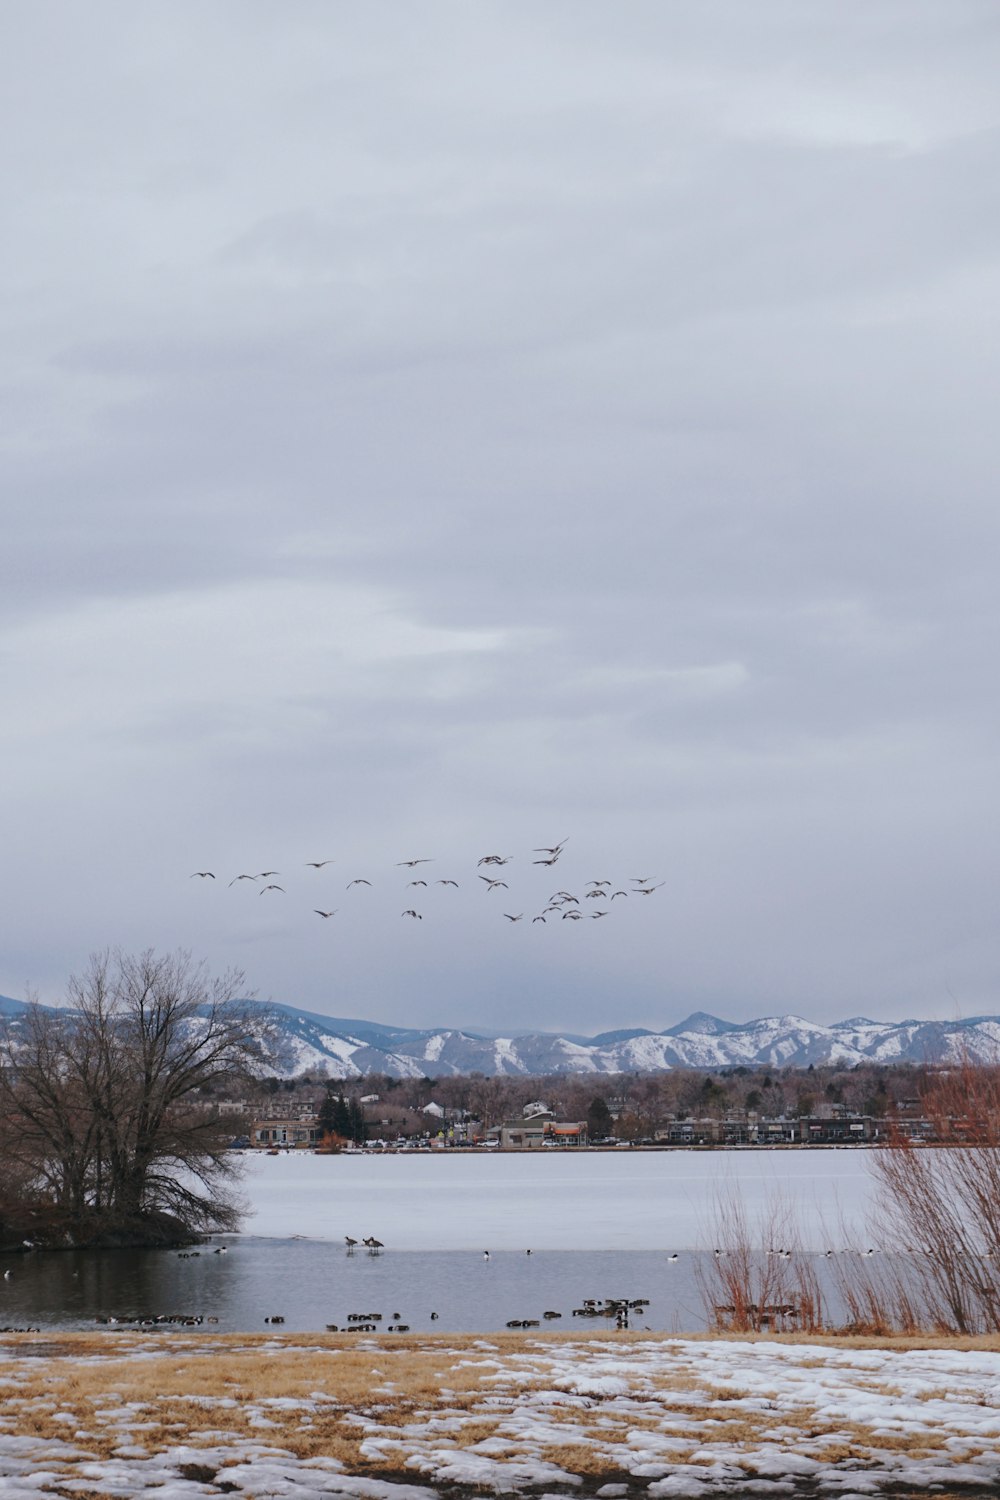 a flock of birds flying over a lake